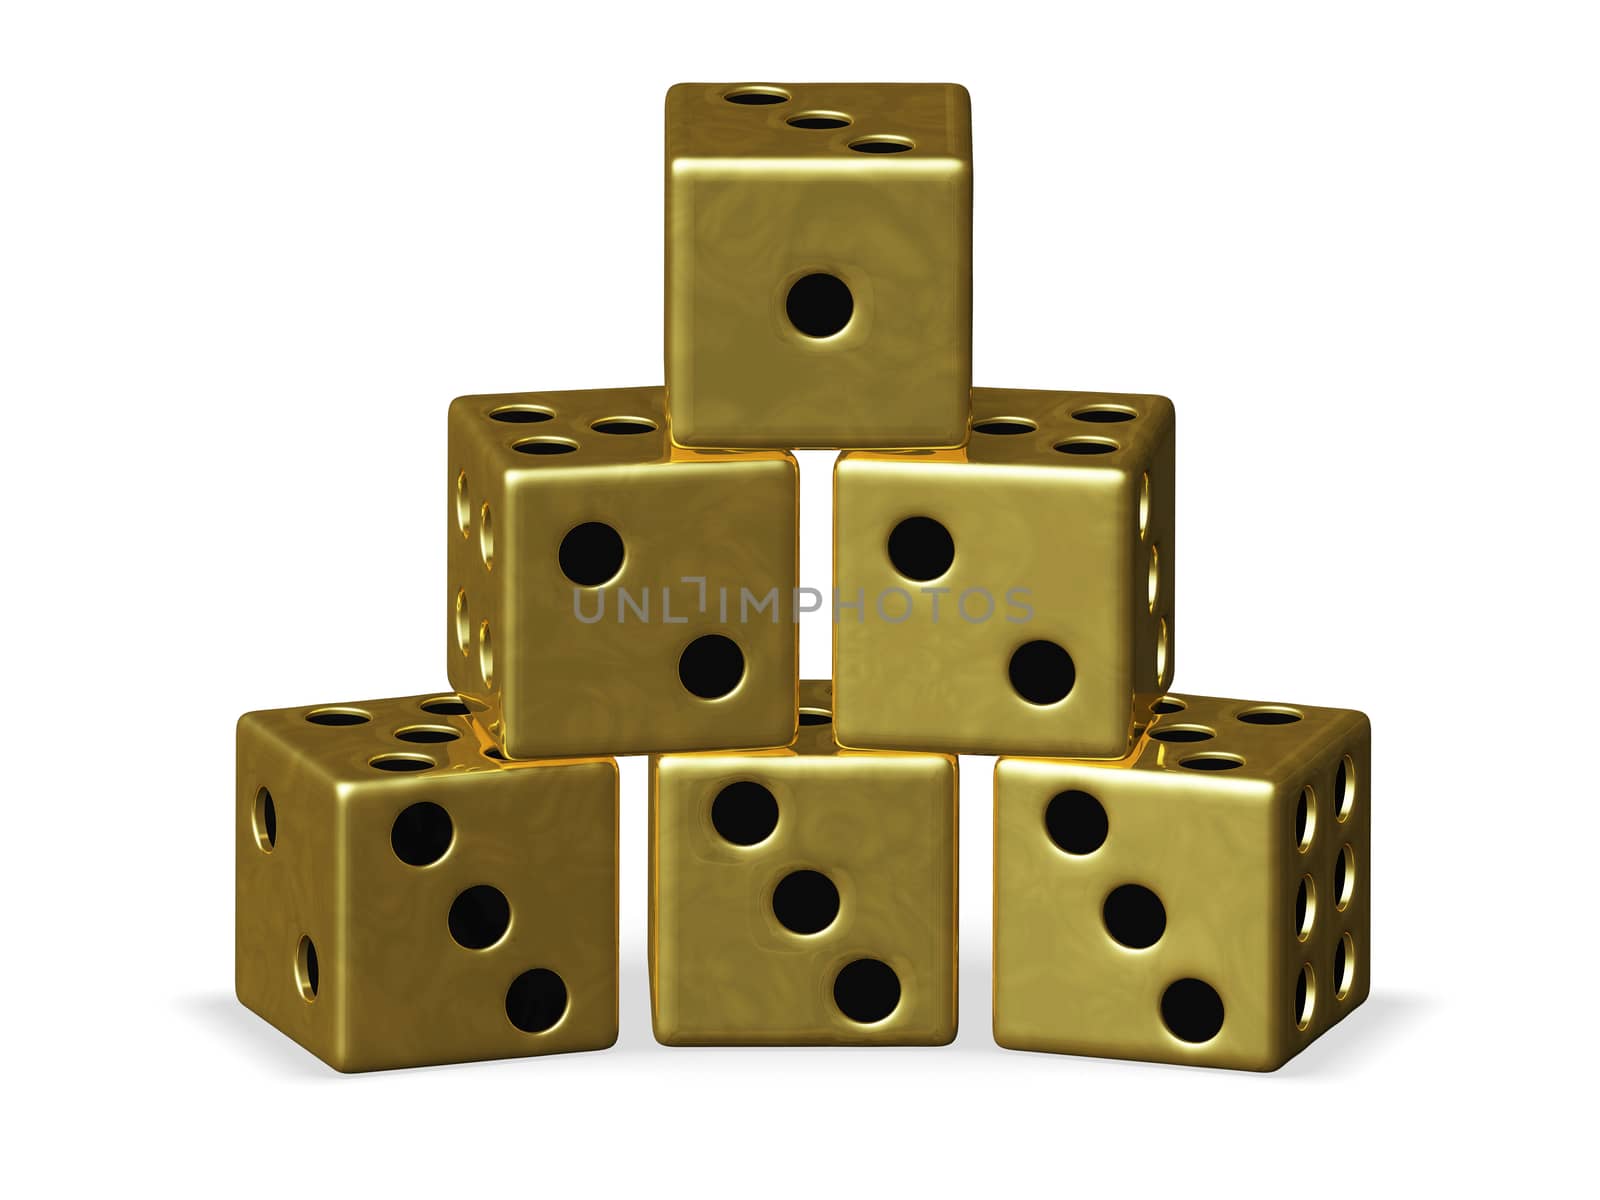 Gold casino playing dice stack arranged in a pyramid shape in increasing order, from top to bottom. Can be used for casino, gambling and winning concepts.
